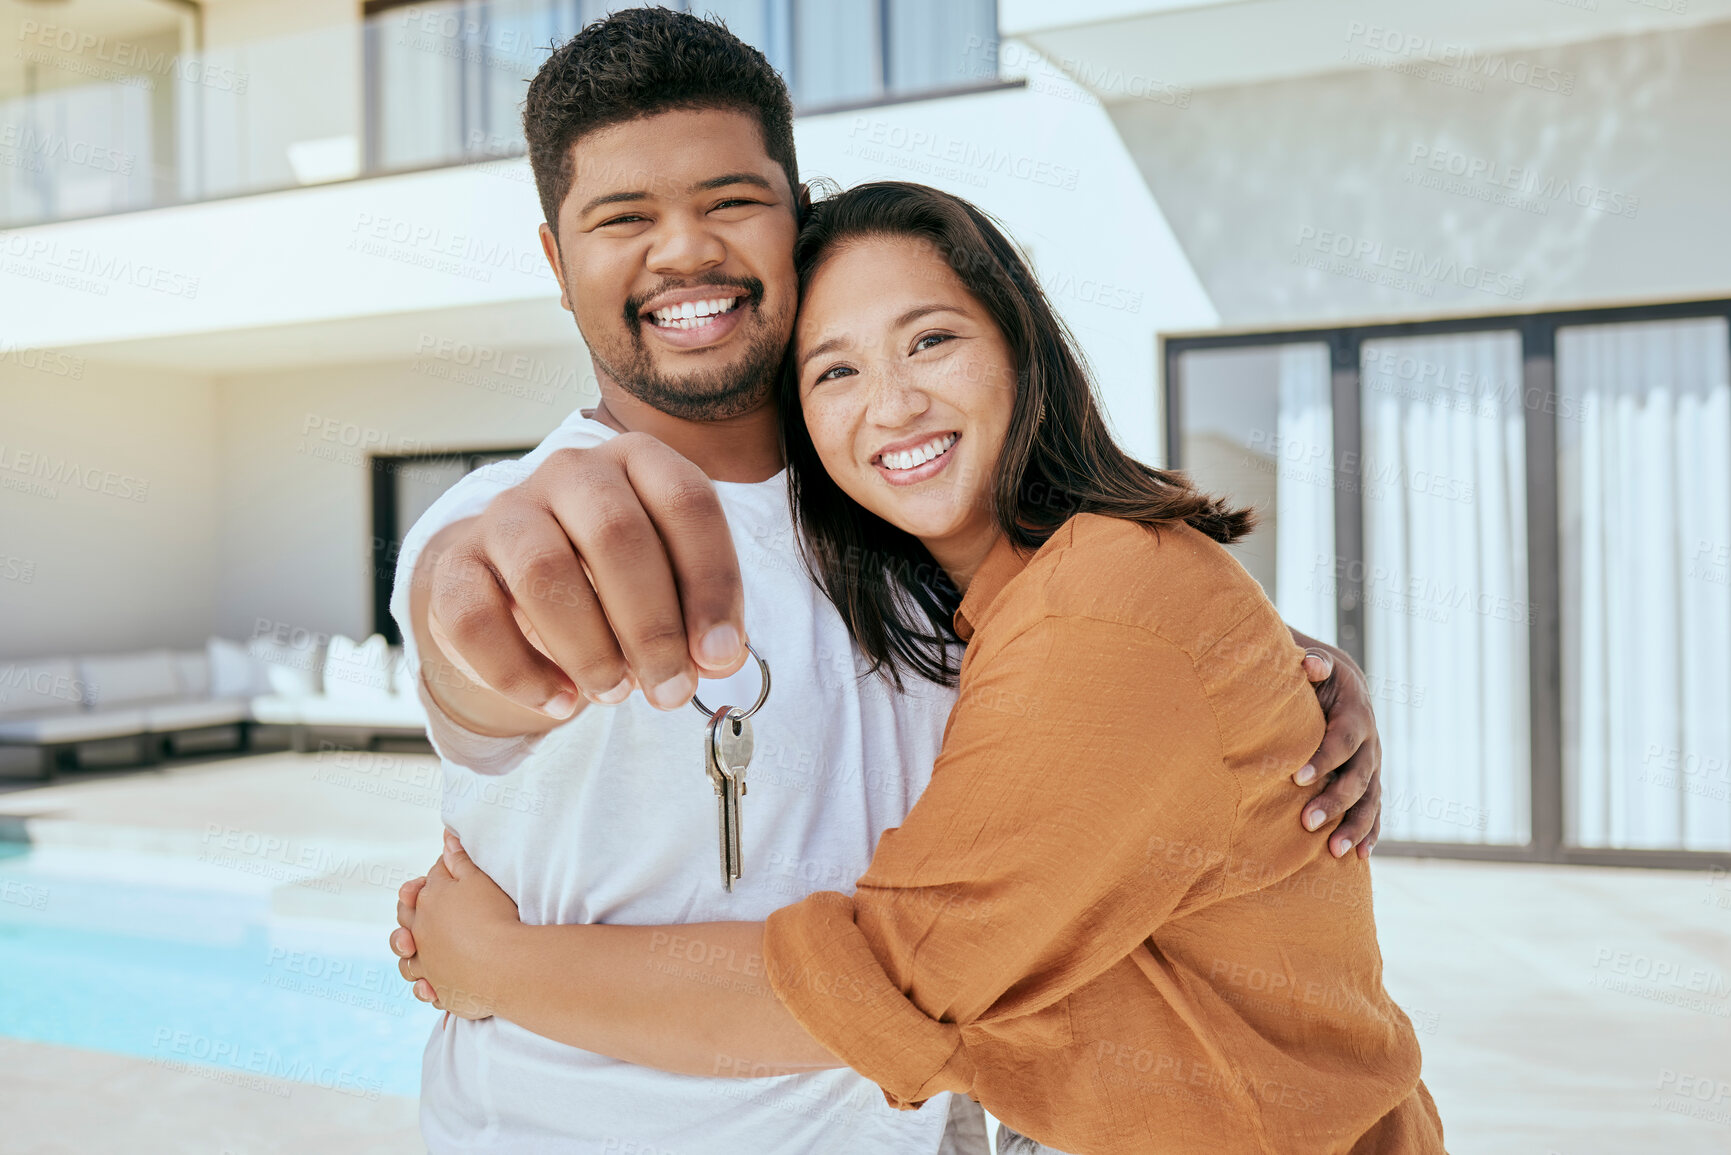 Buy stock photo Homeowner, couple and show keys to new house, being happy and successful with smile, relax and hug. Portrait, black man and Asian woman celebrate, on property investment and embrace together outdoor.